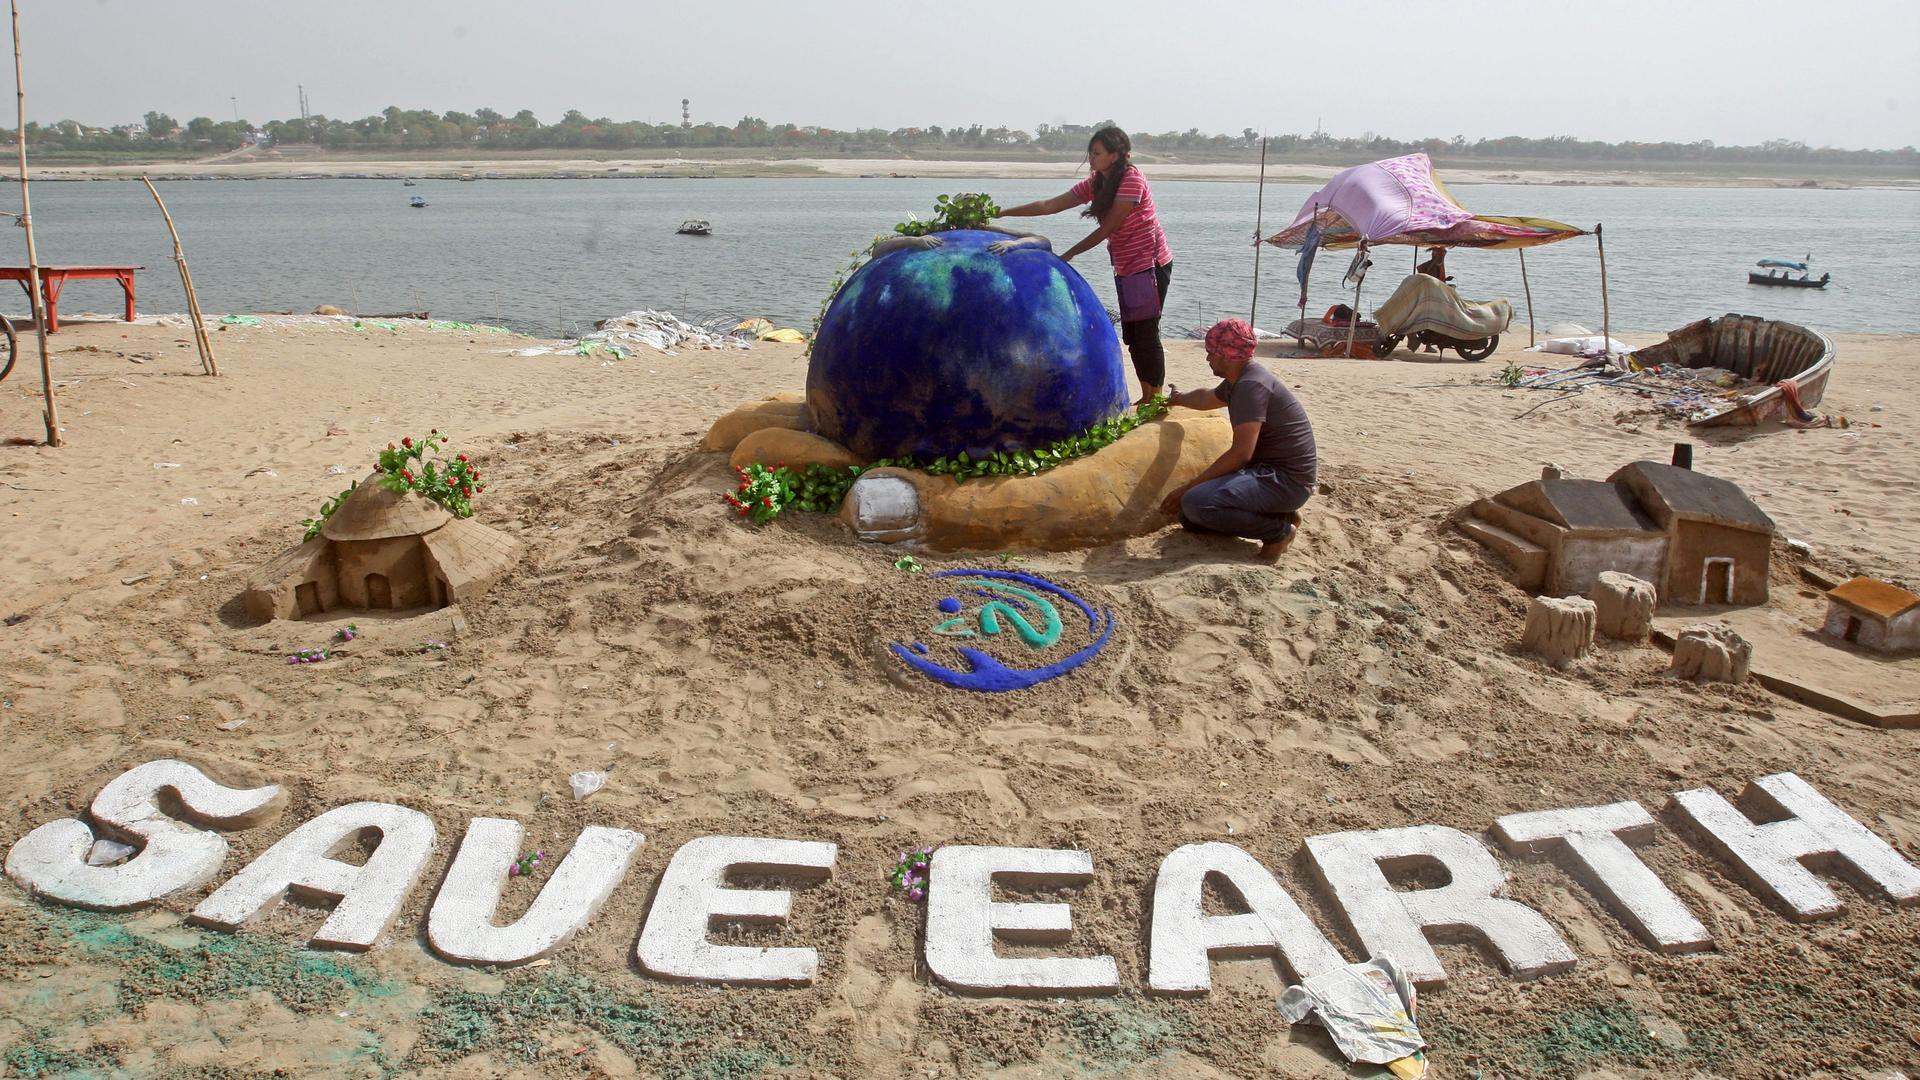 children on a beach on earth day